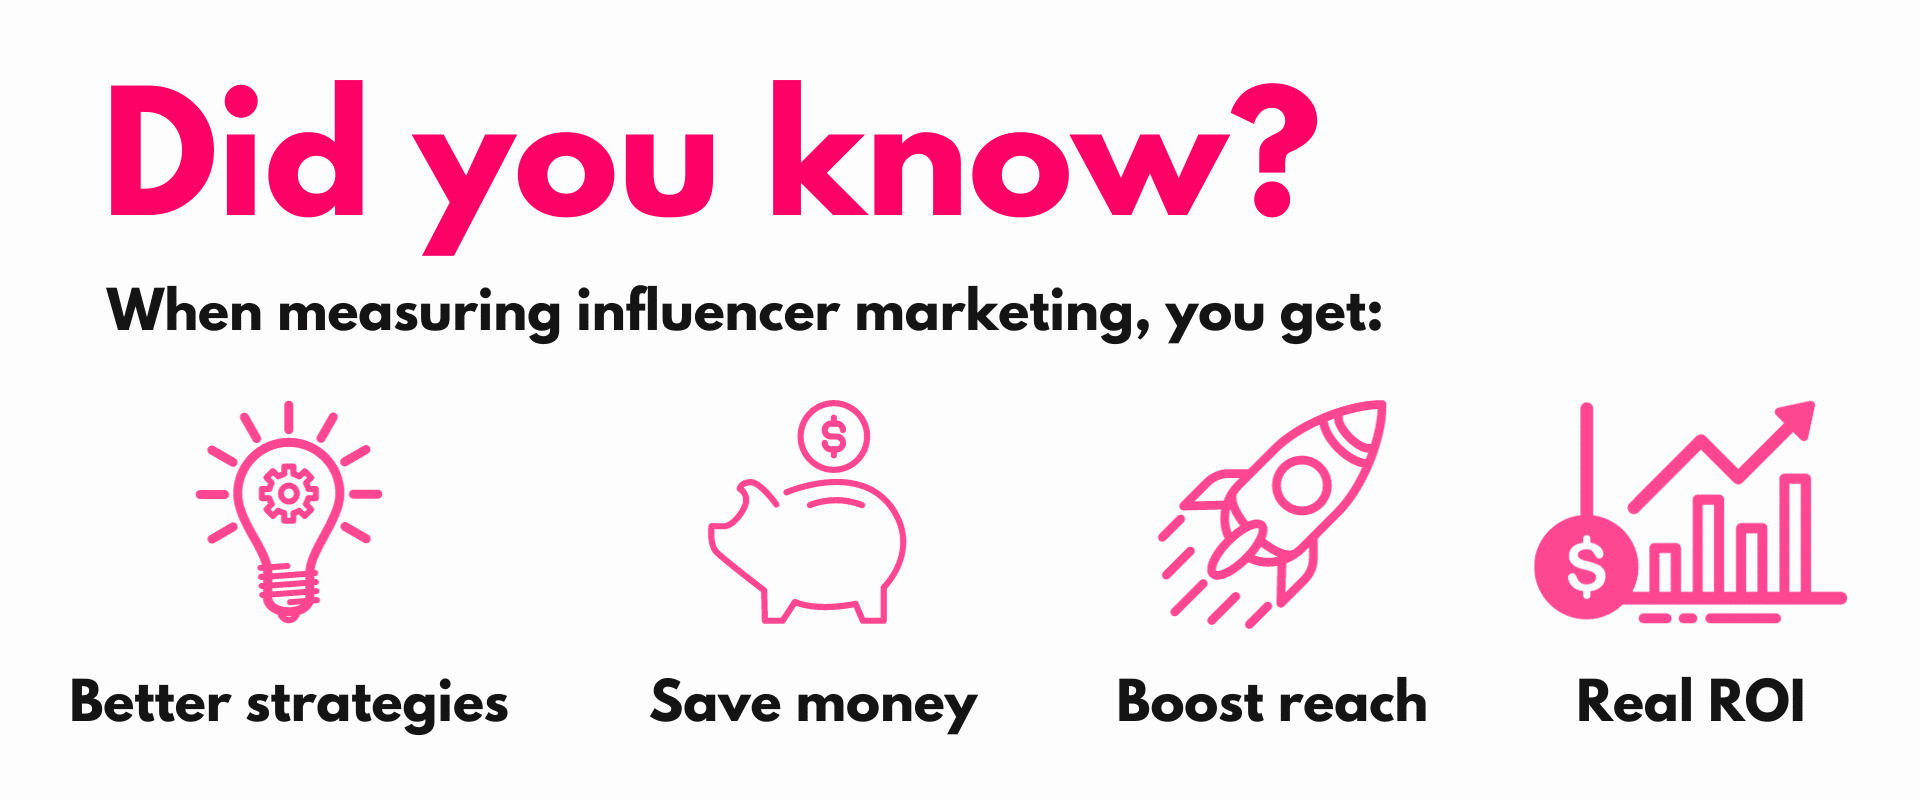 Did you know when measuring influence marketing you get better money?.